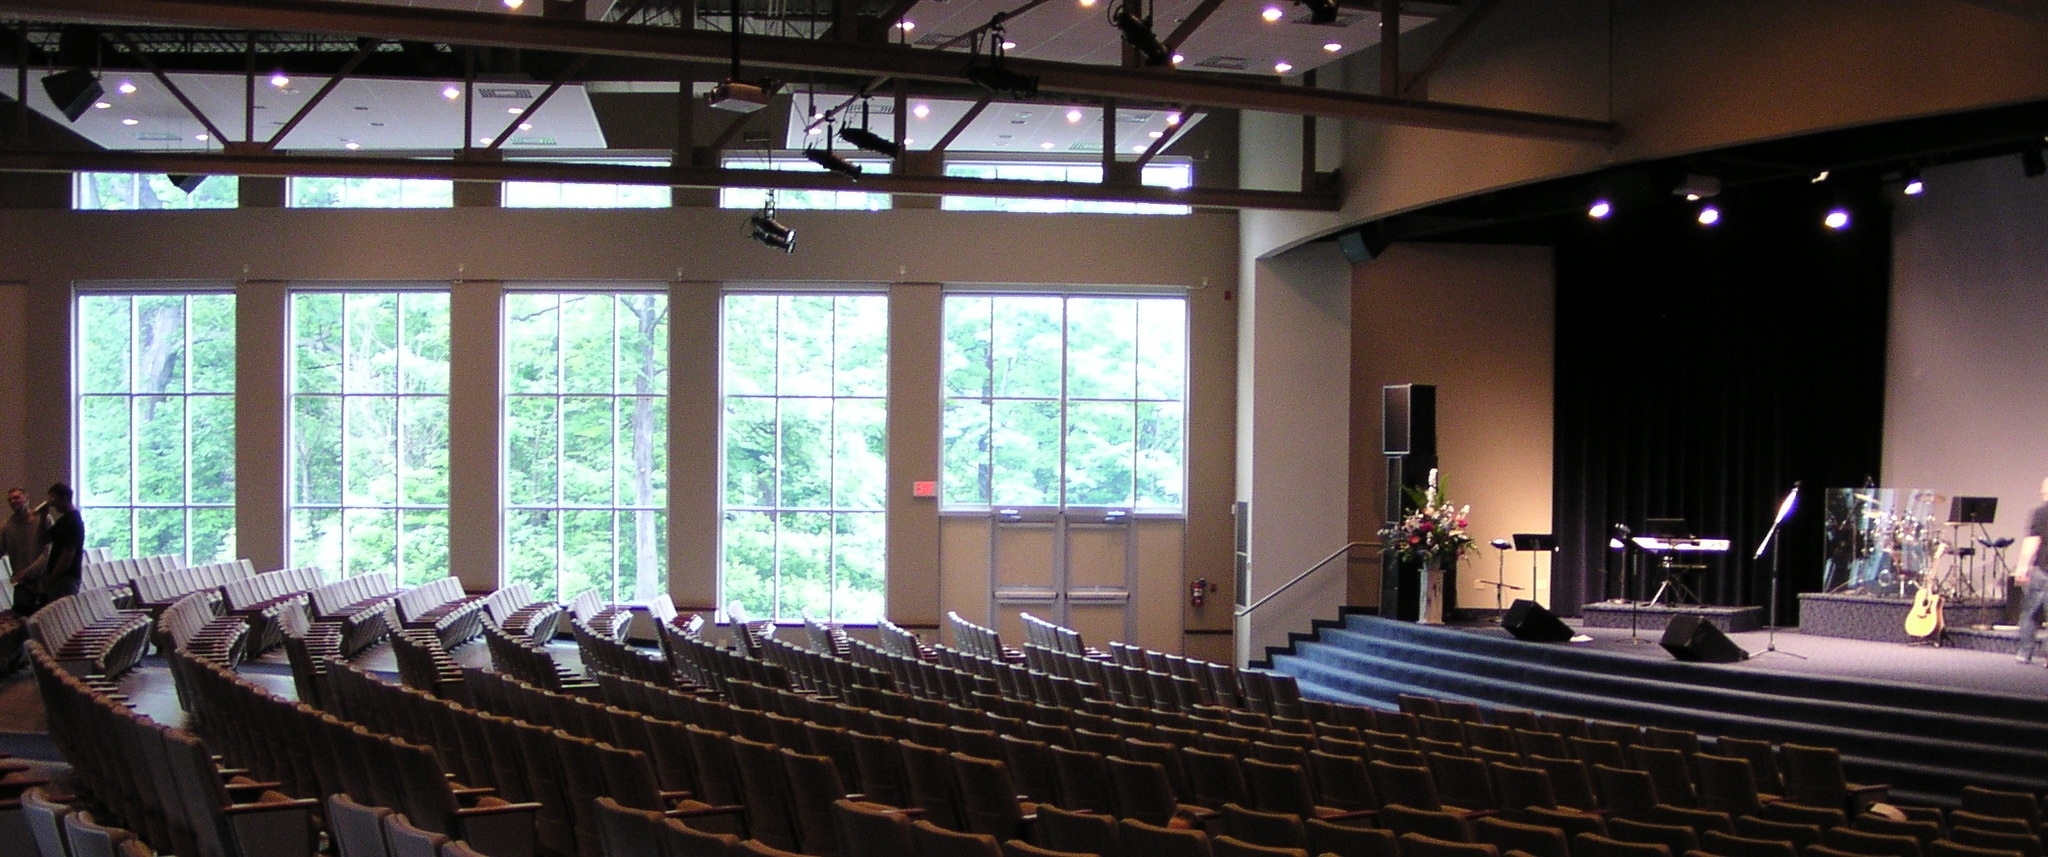 Catch Church Seating Layout